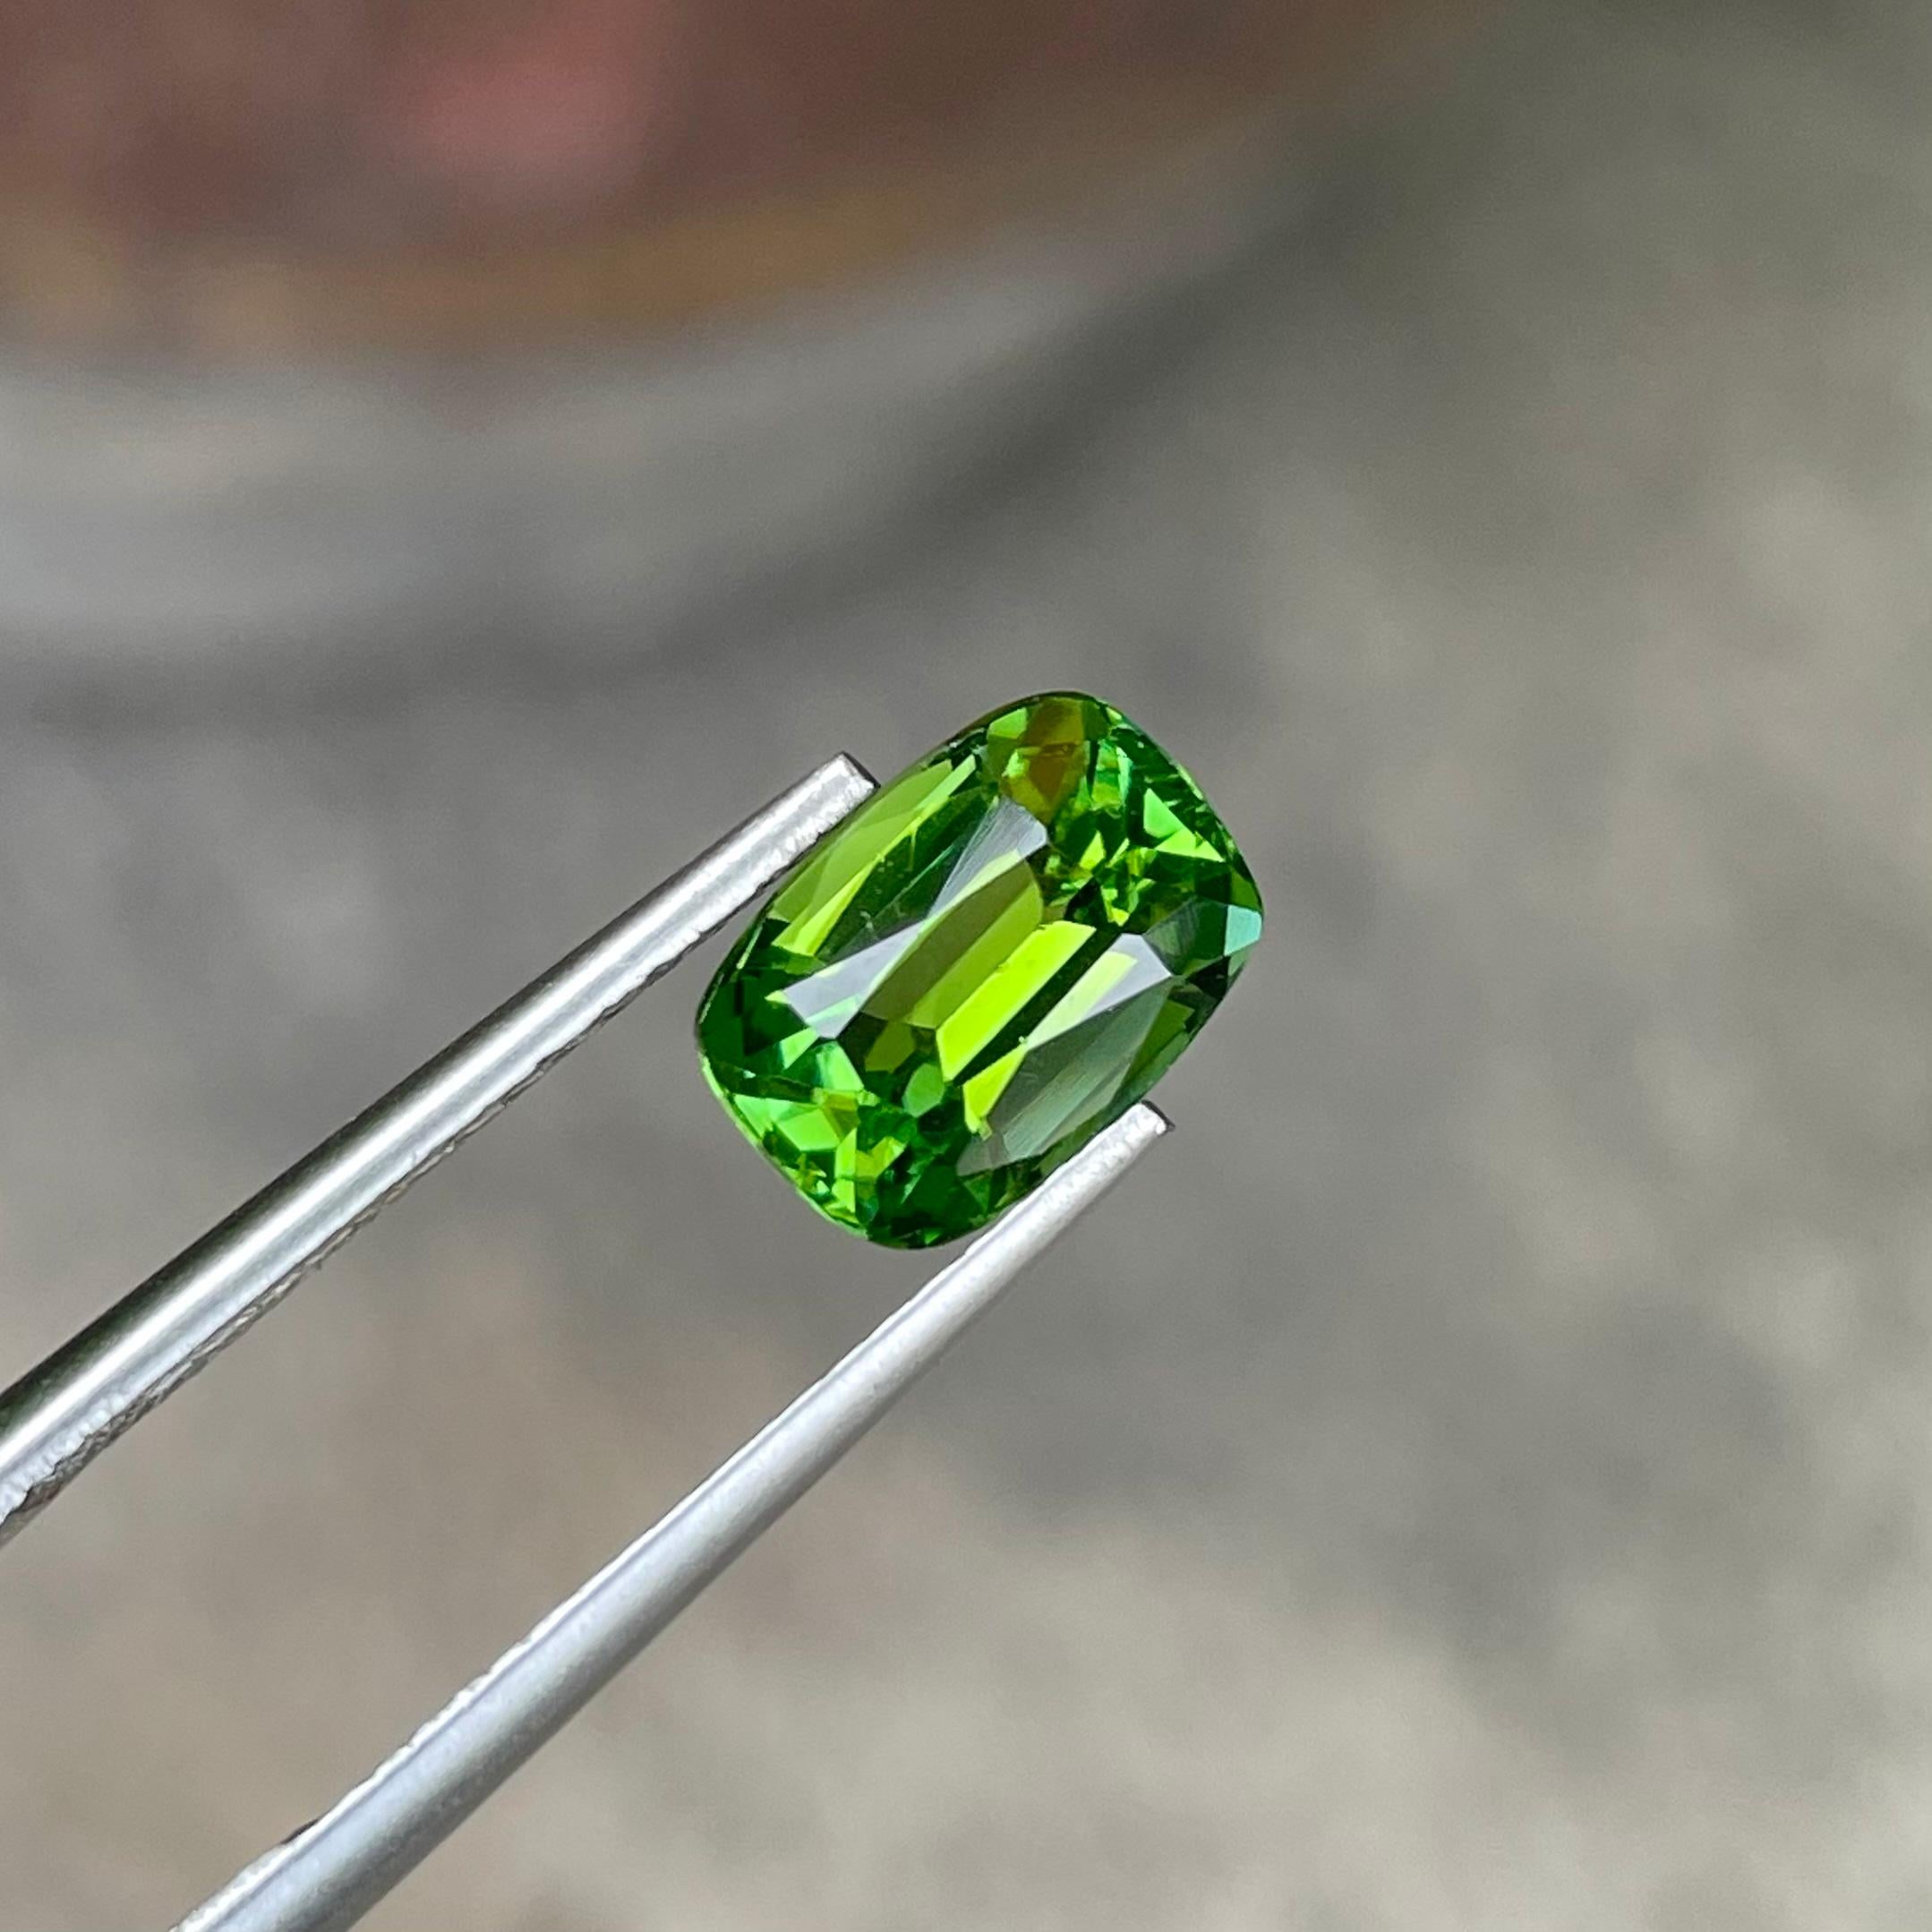 Weight 2.0 carats 
Dimensions 9.0 x 6.4 x 4.8 mm
Treatment None 
Origin Nigeria 
Clarity Eye Clean 
Shape Cushion 
Cut Fancy Cushion 



Discover the allure of an Authentic Mint Green Tourmaline, a true natural wonder from Nigeria. This exquisite